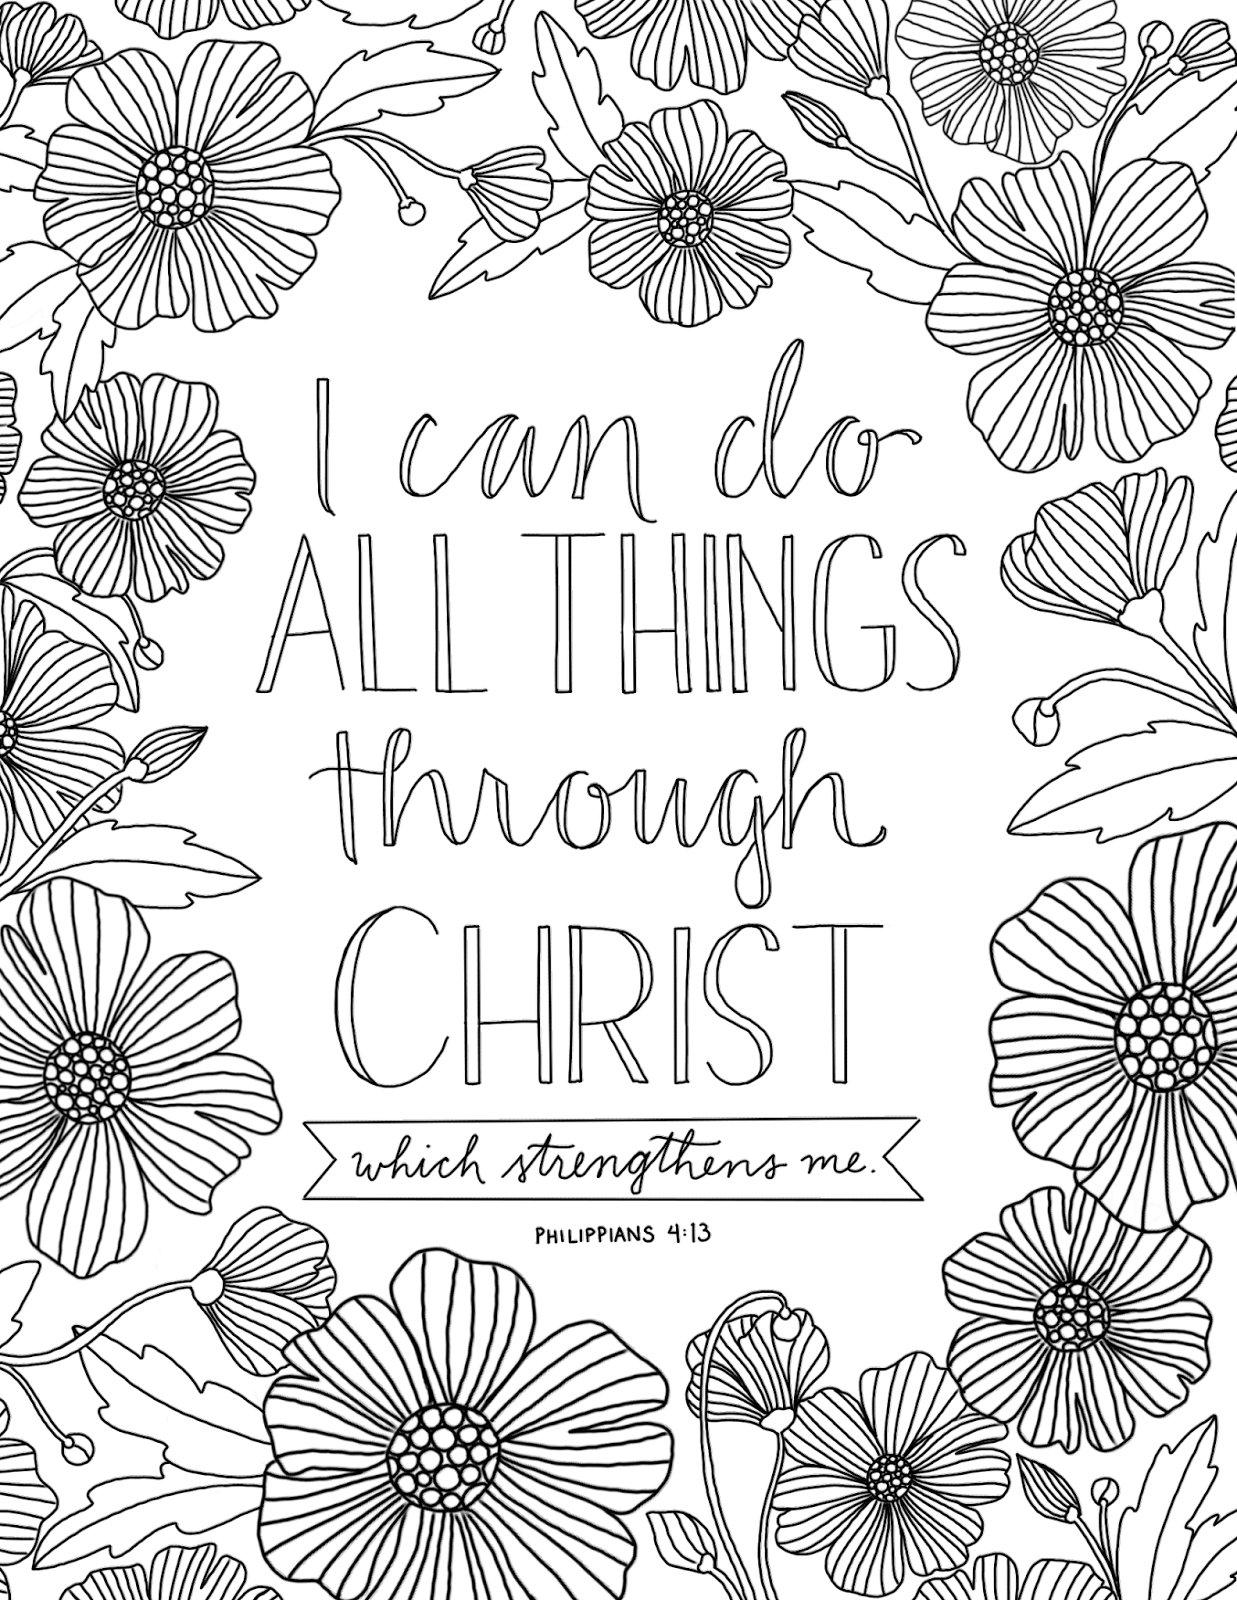 Just what i squeeze in all things through christ